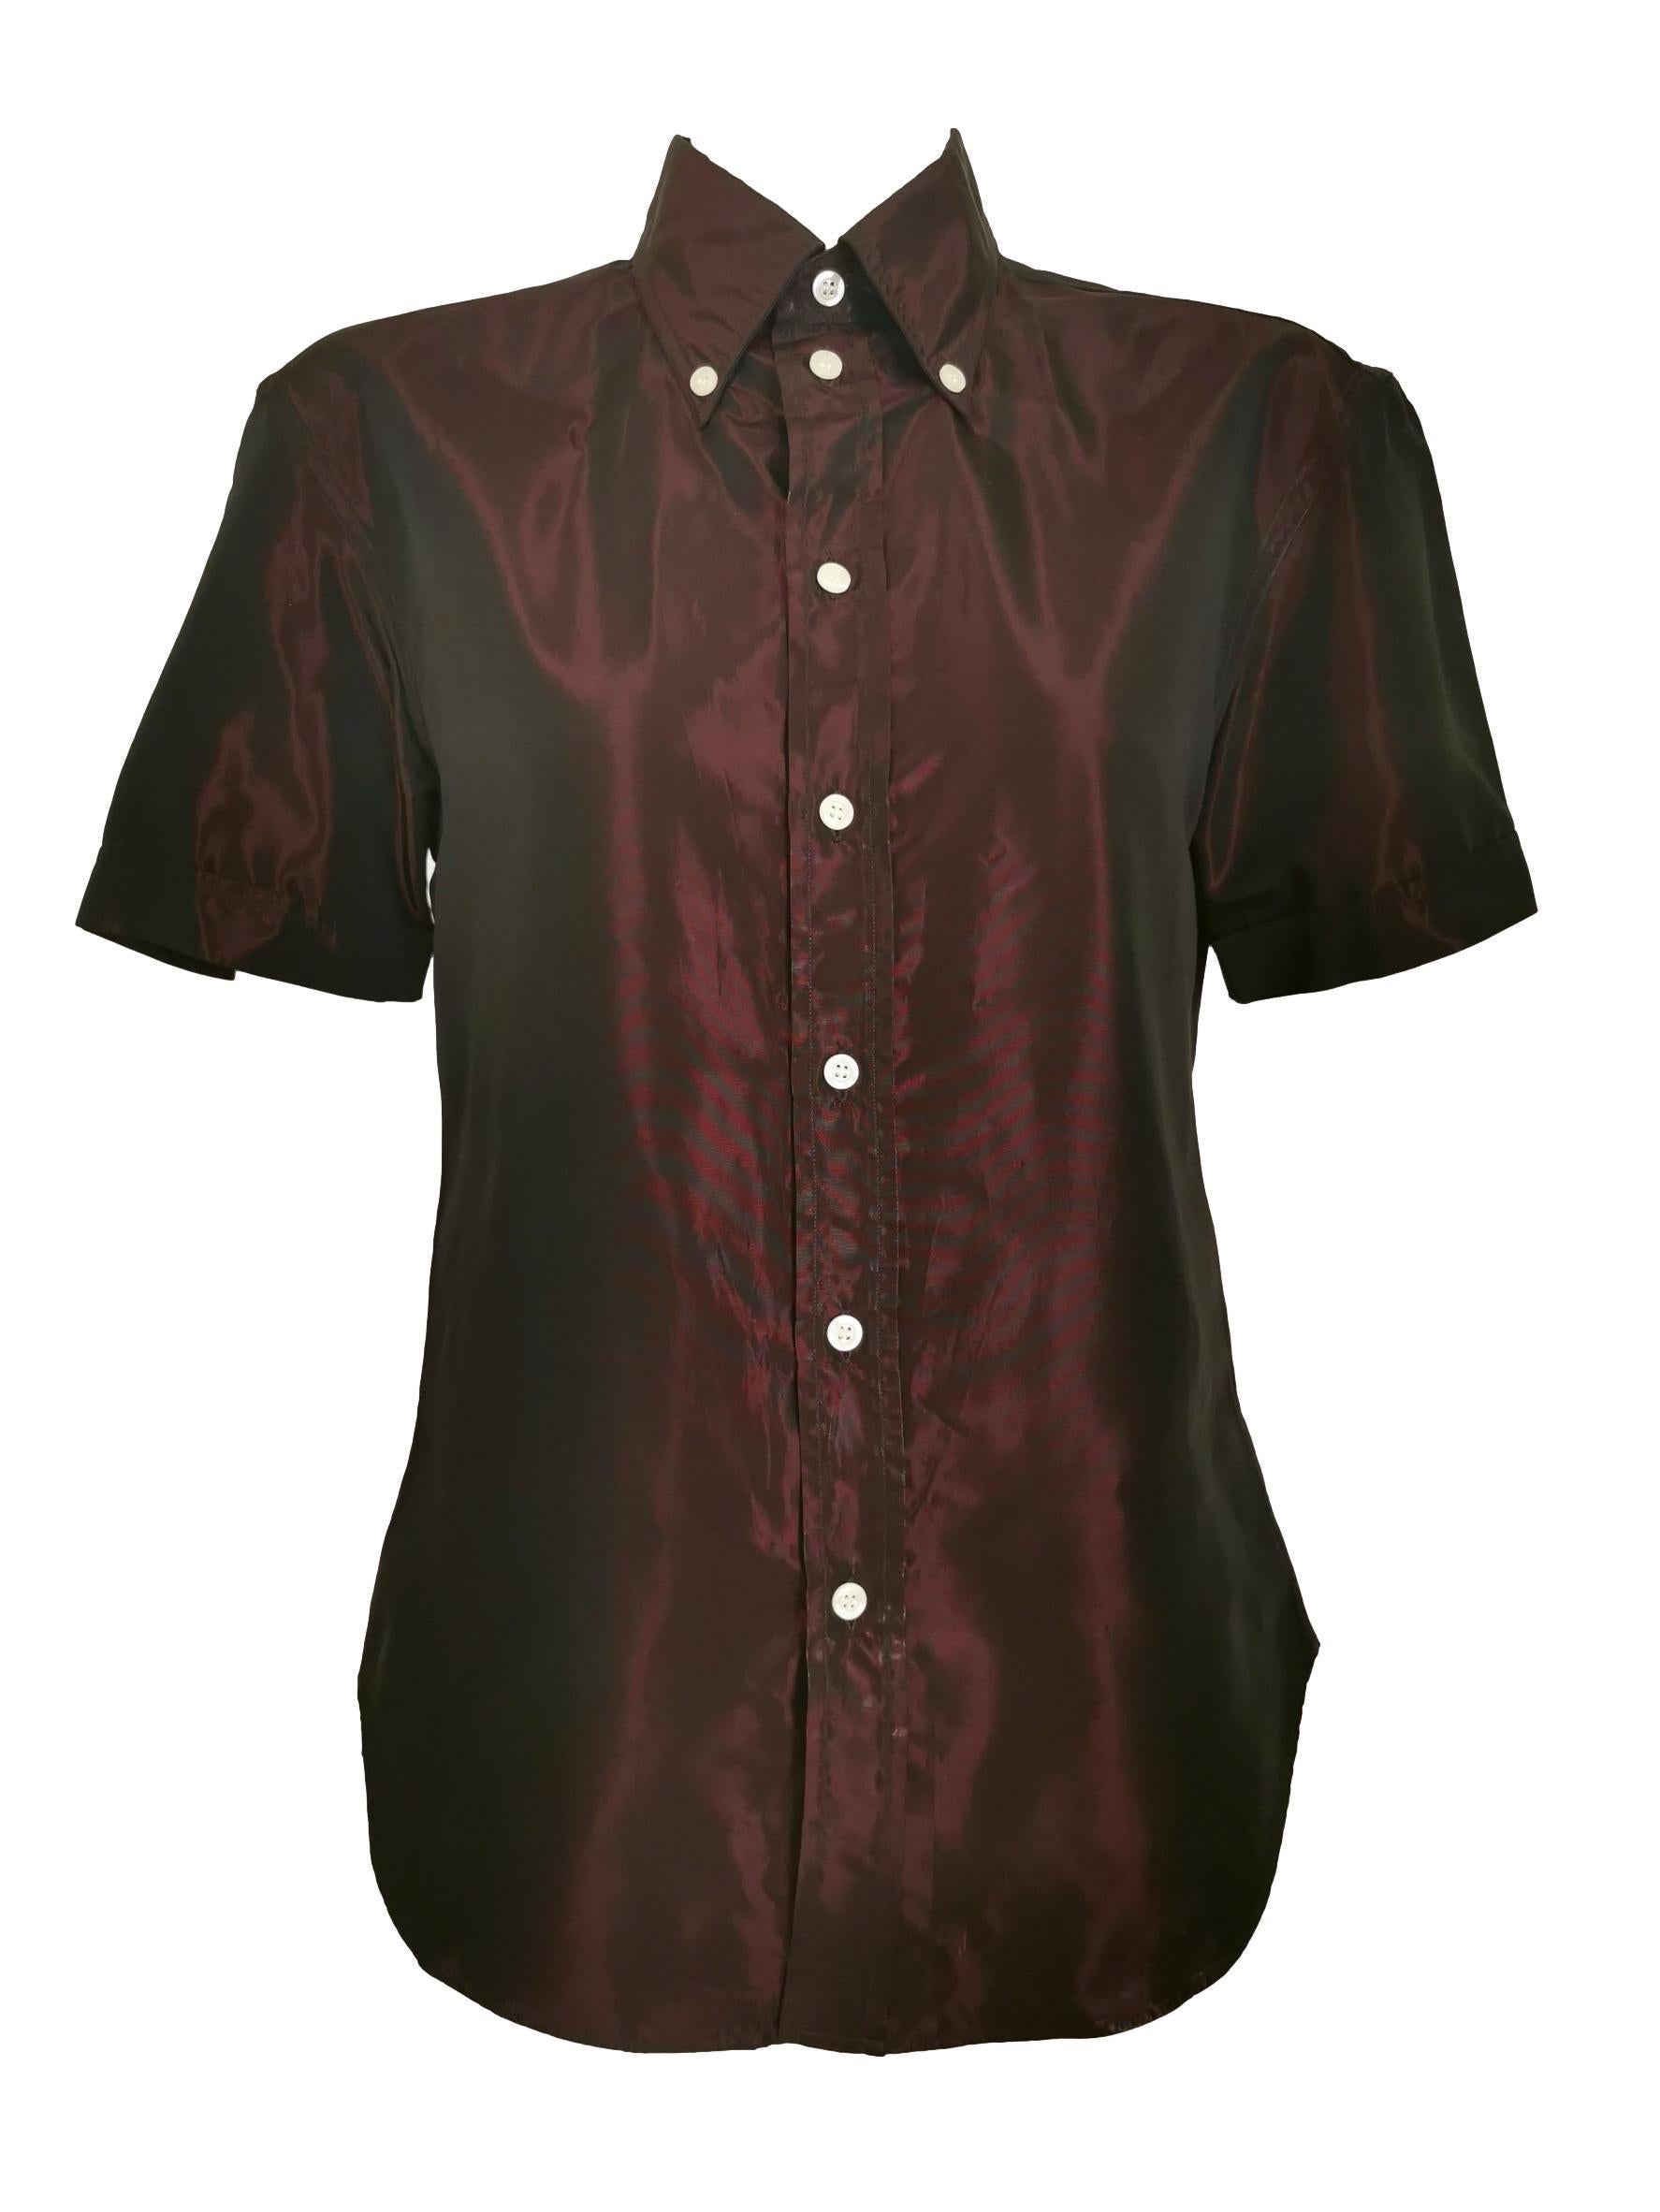 Women's or Men's Alexander McQueen Two Tone Fitted Shirt 1996 For Sale